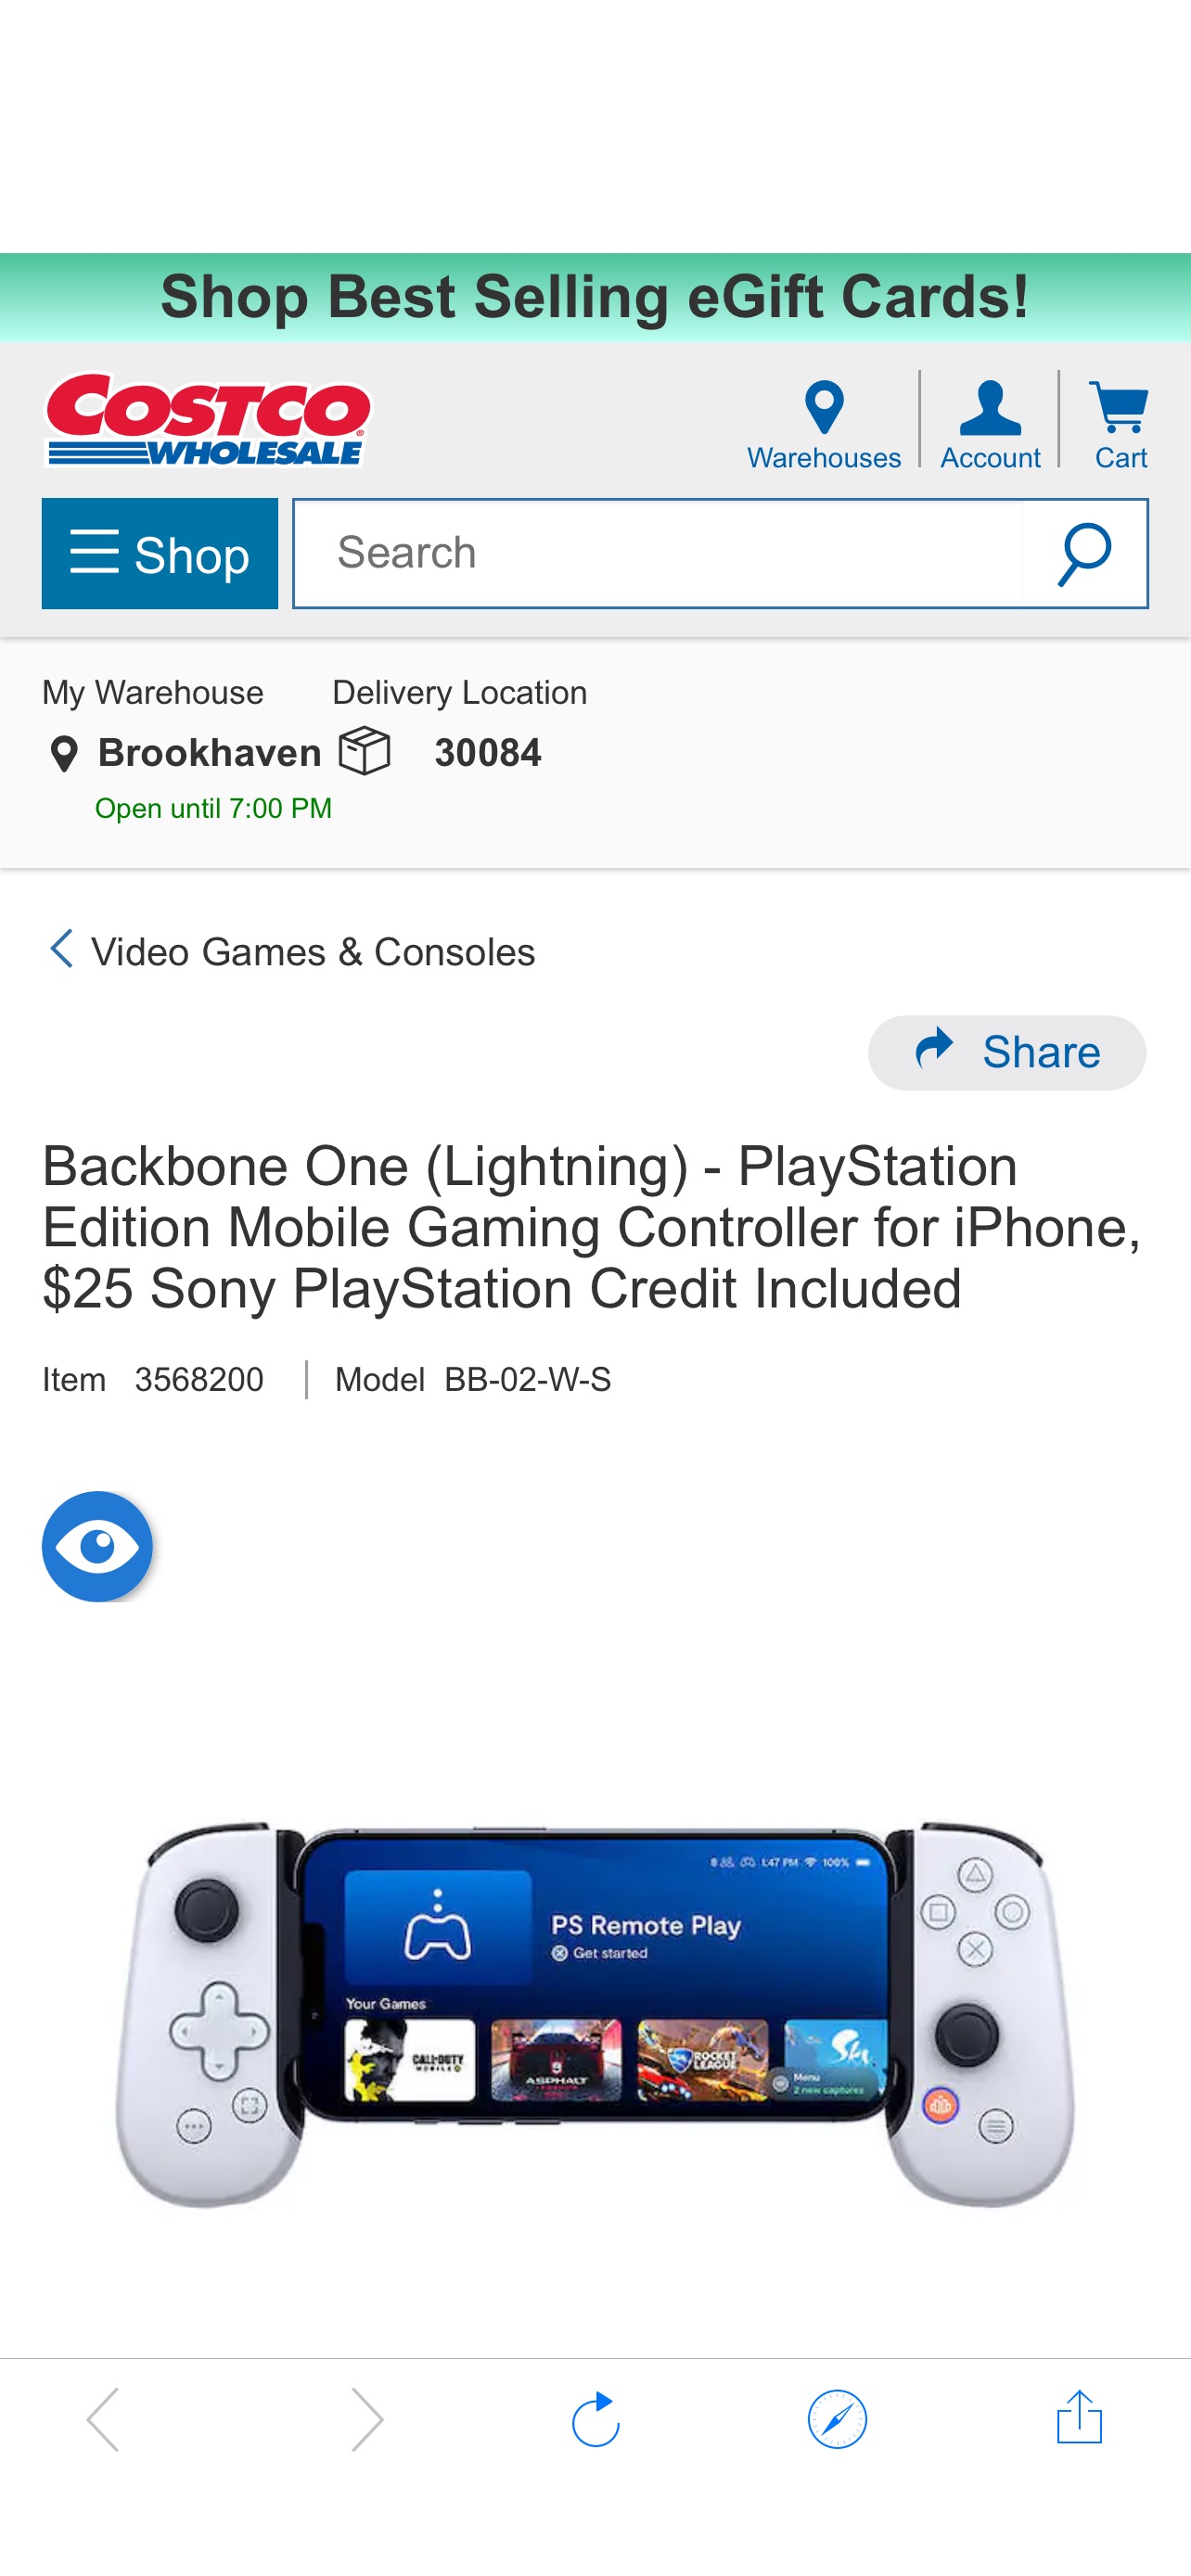 Backbone One (Lightning) - PlayStation Edition Mobile Gaming Controller for iPhone, $25 Sony PlayStation Credit Included | Costco控制器